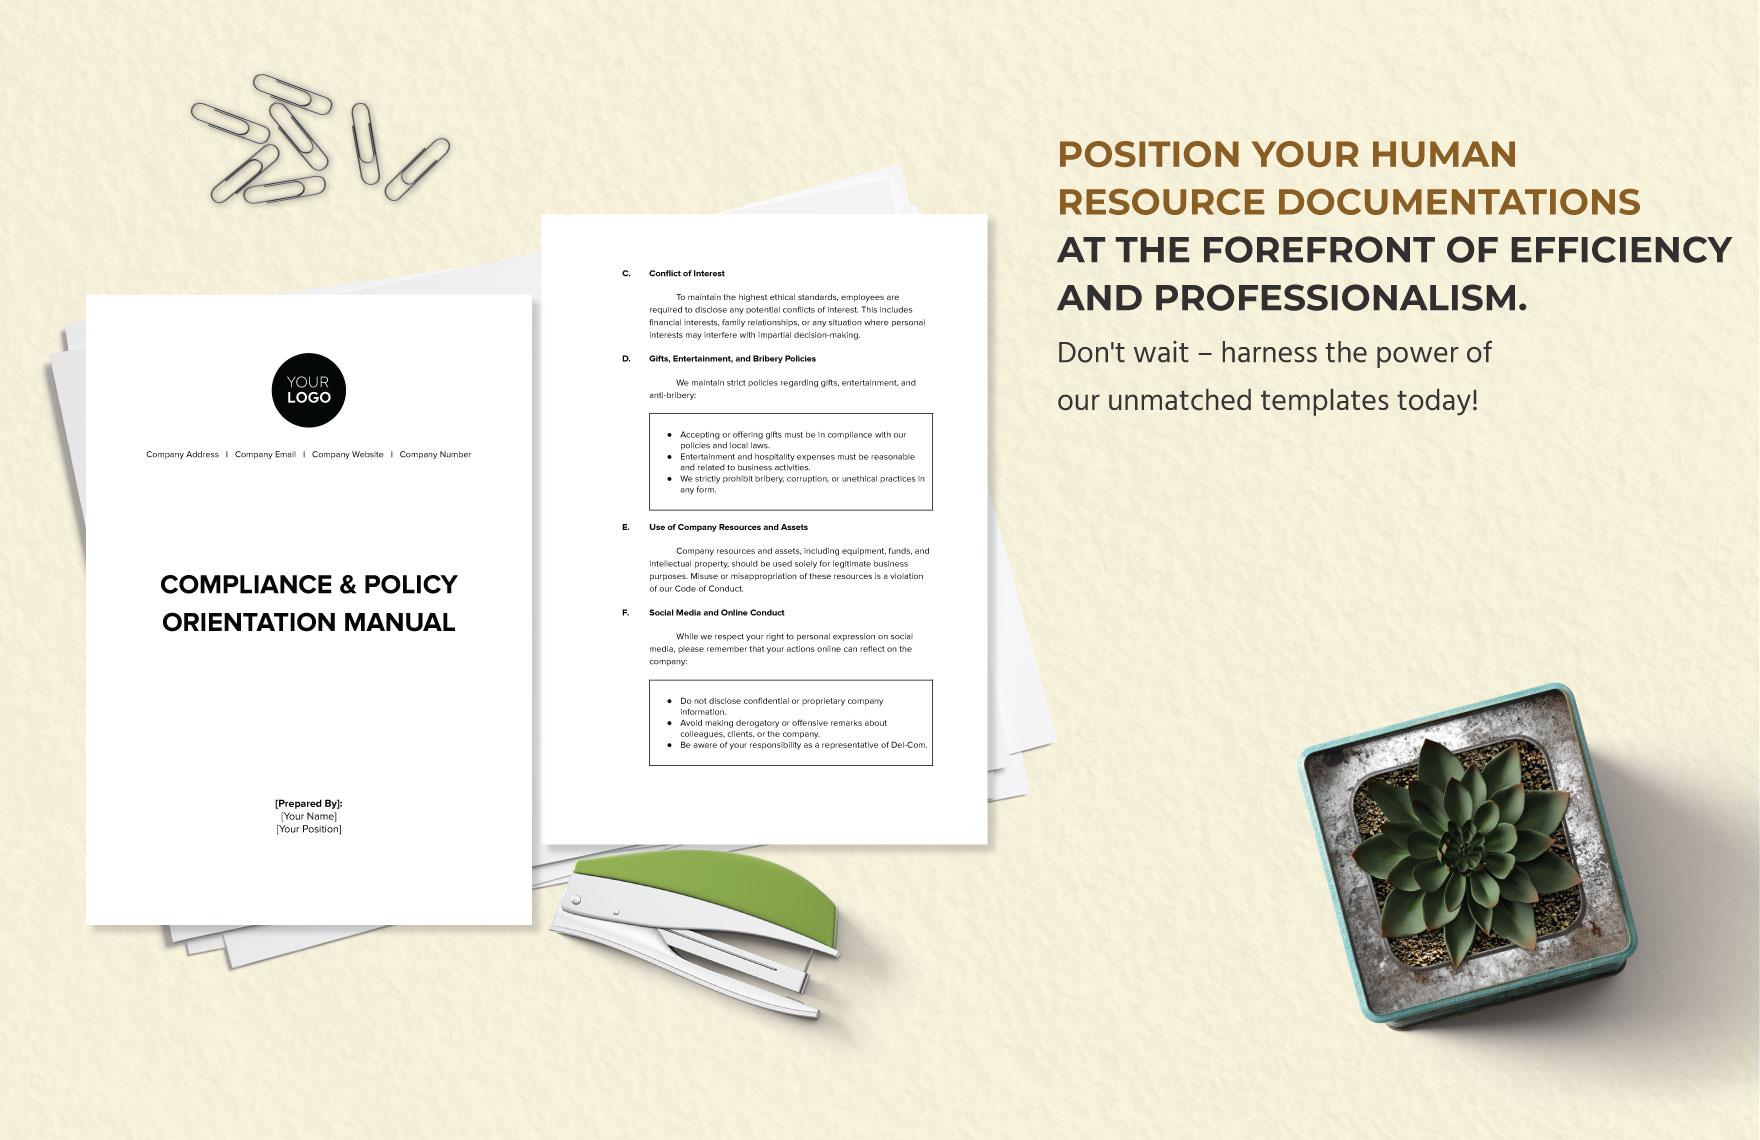  Compliance & Policy Orientation Manual HR Template